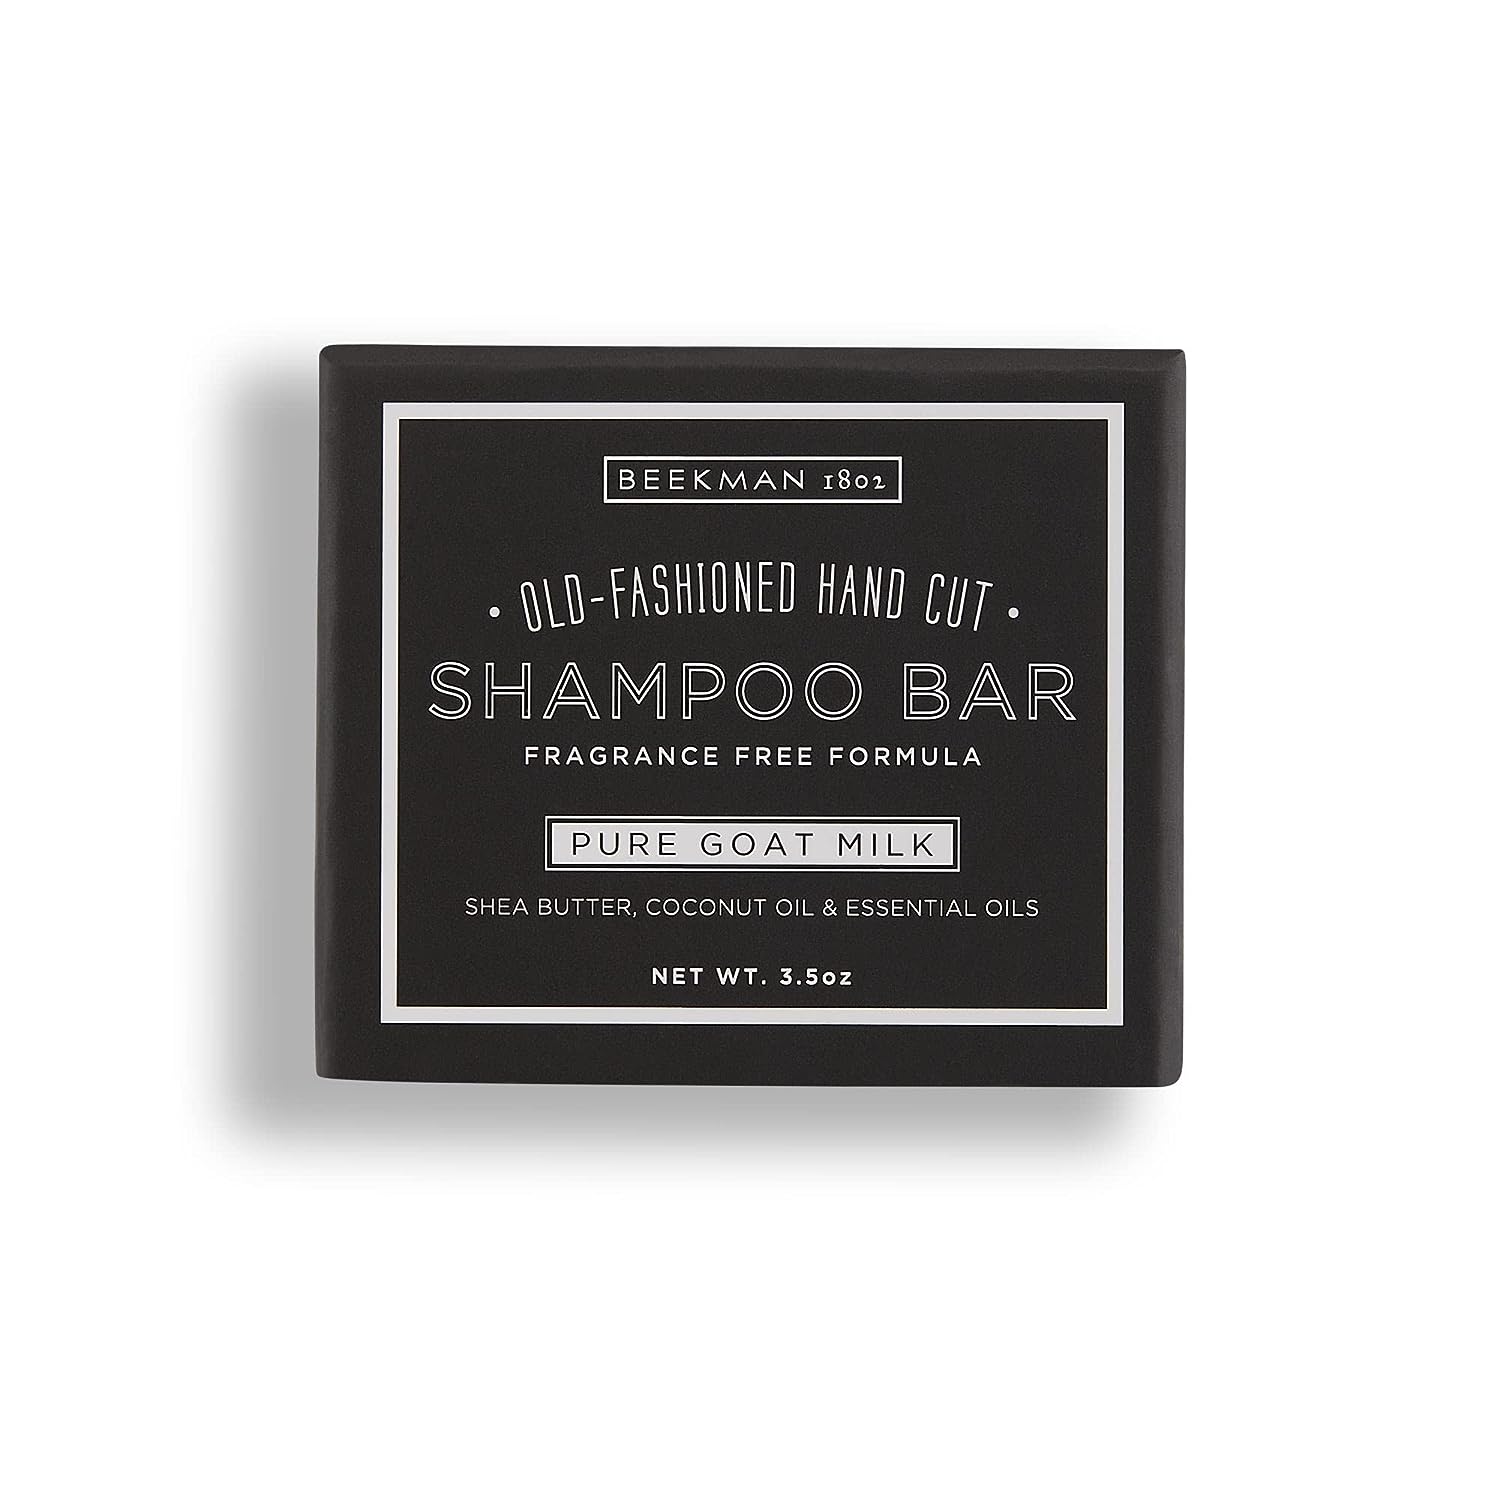 Beekman 1802 Shampoo Bar, Pure (Fragrance Free) - 3.5  - Cleanses & Revitalizes Hair - Safe for All Hair Types, Including Color Treated - Cruelty Free